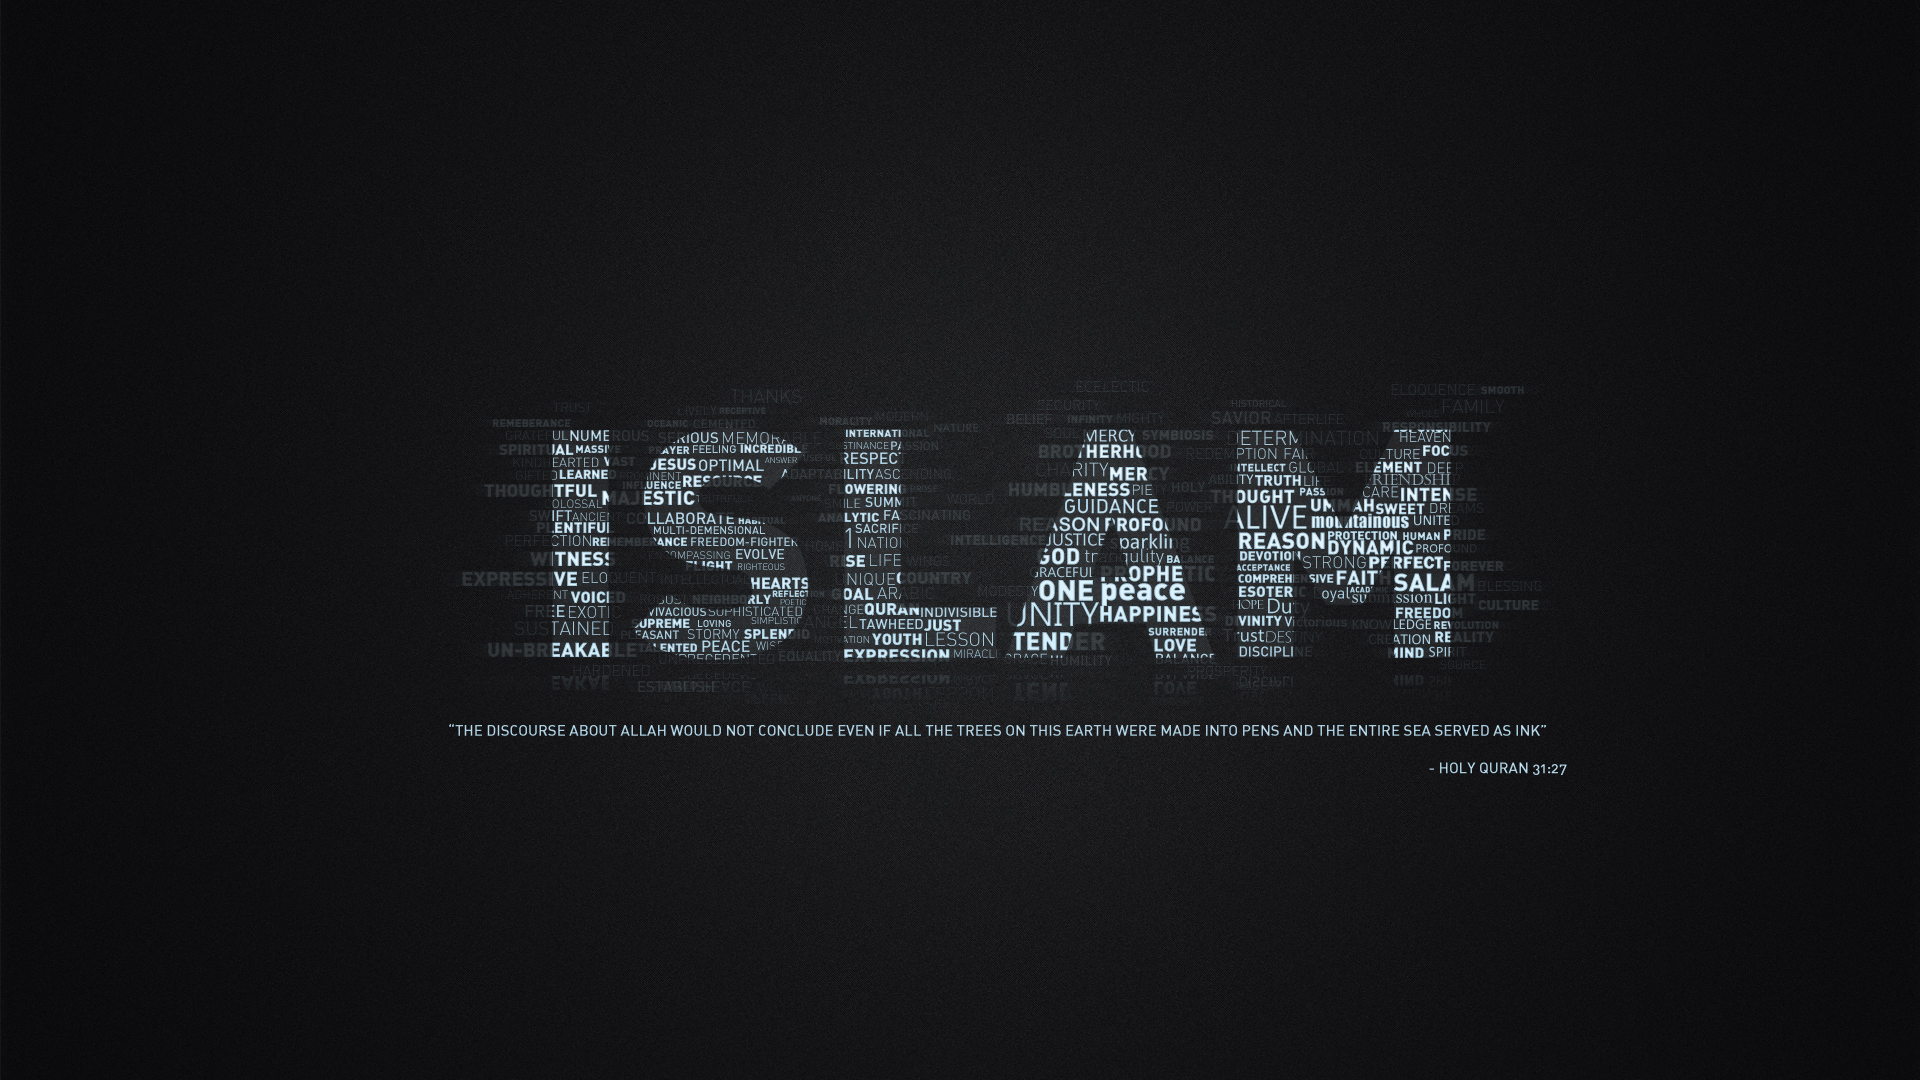 Islamic Desktop Wallpaper And Pictures